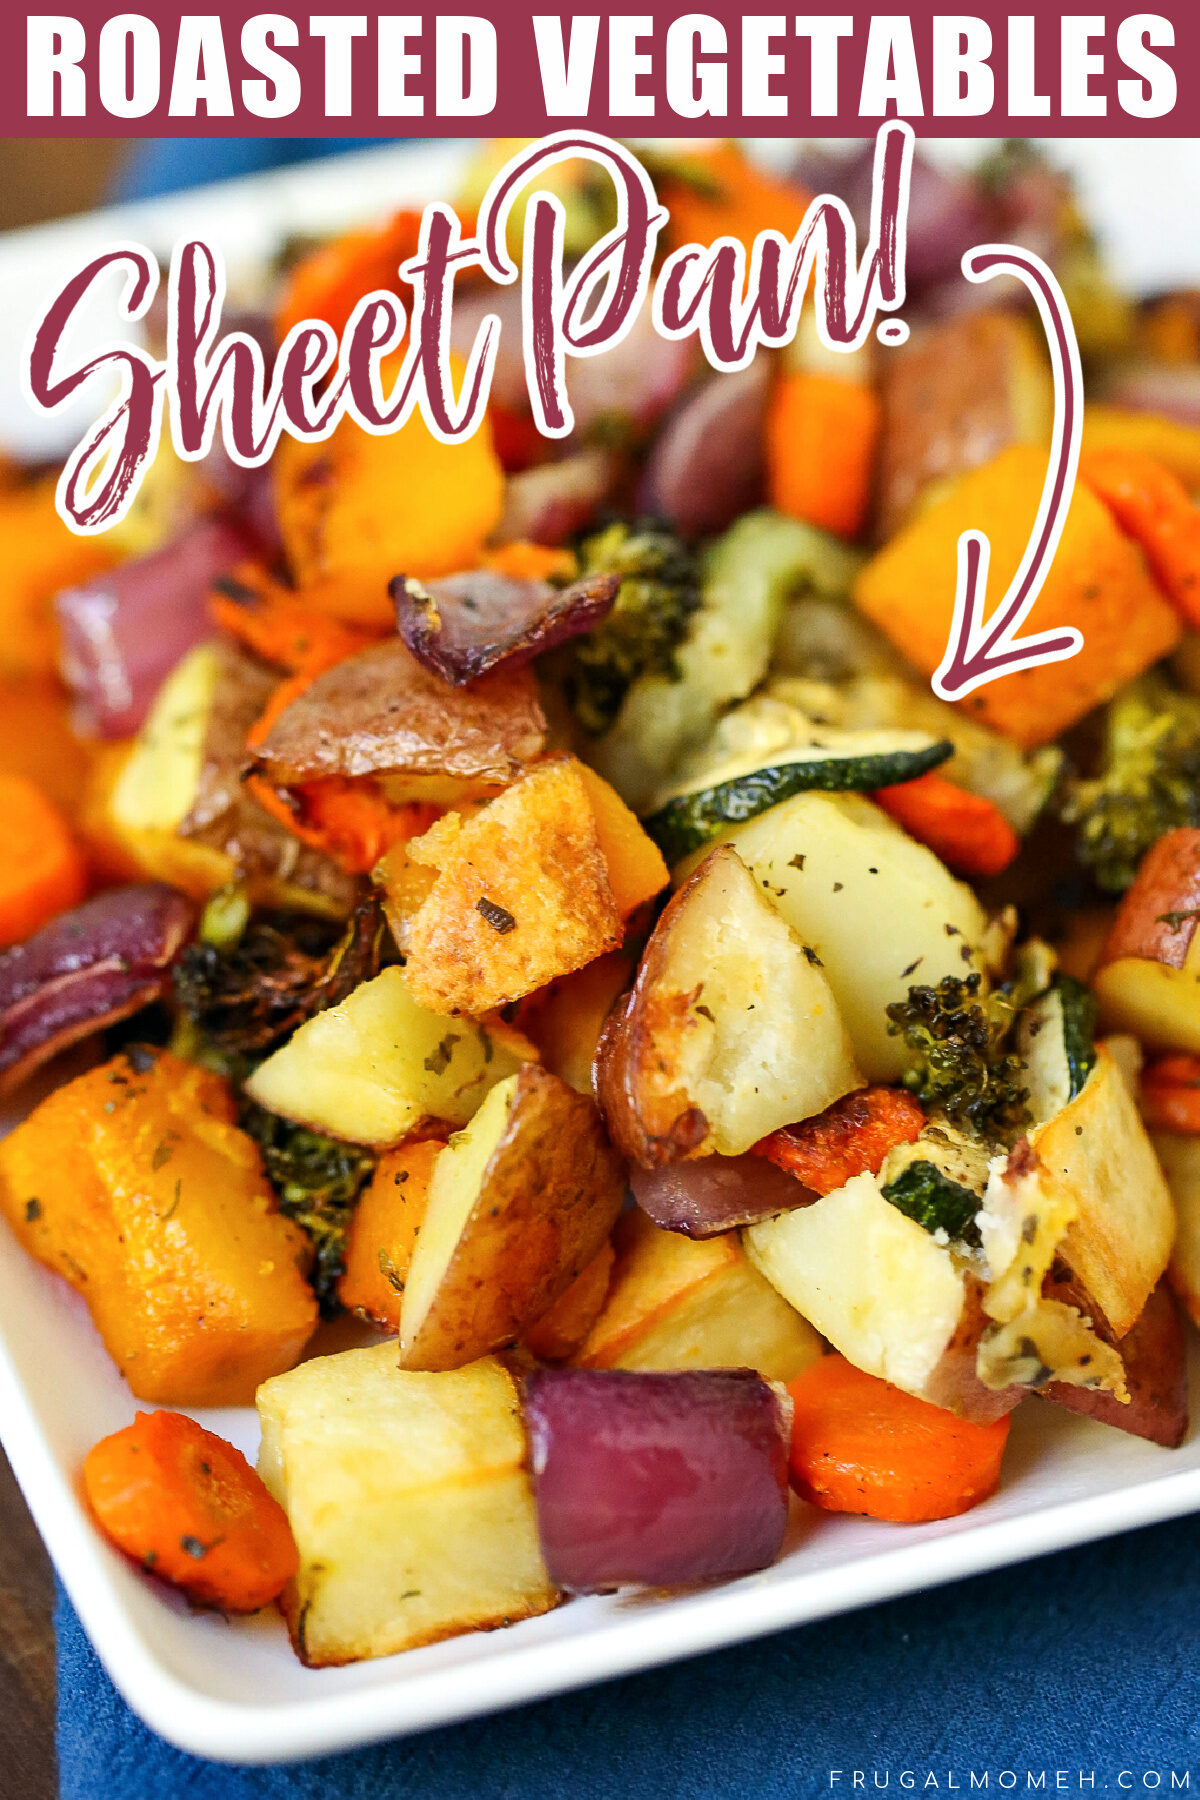 Oven-Roasted Vegetables are a great side dish for any meal, and this recipe is an easy and delicious way to prepare them.